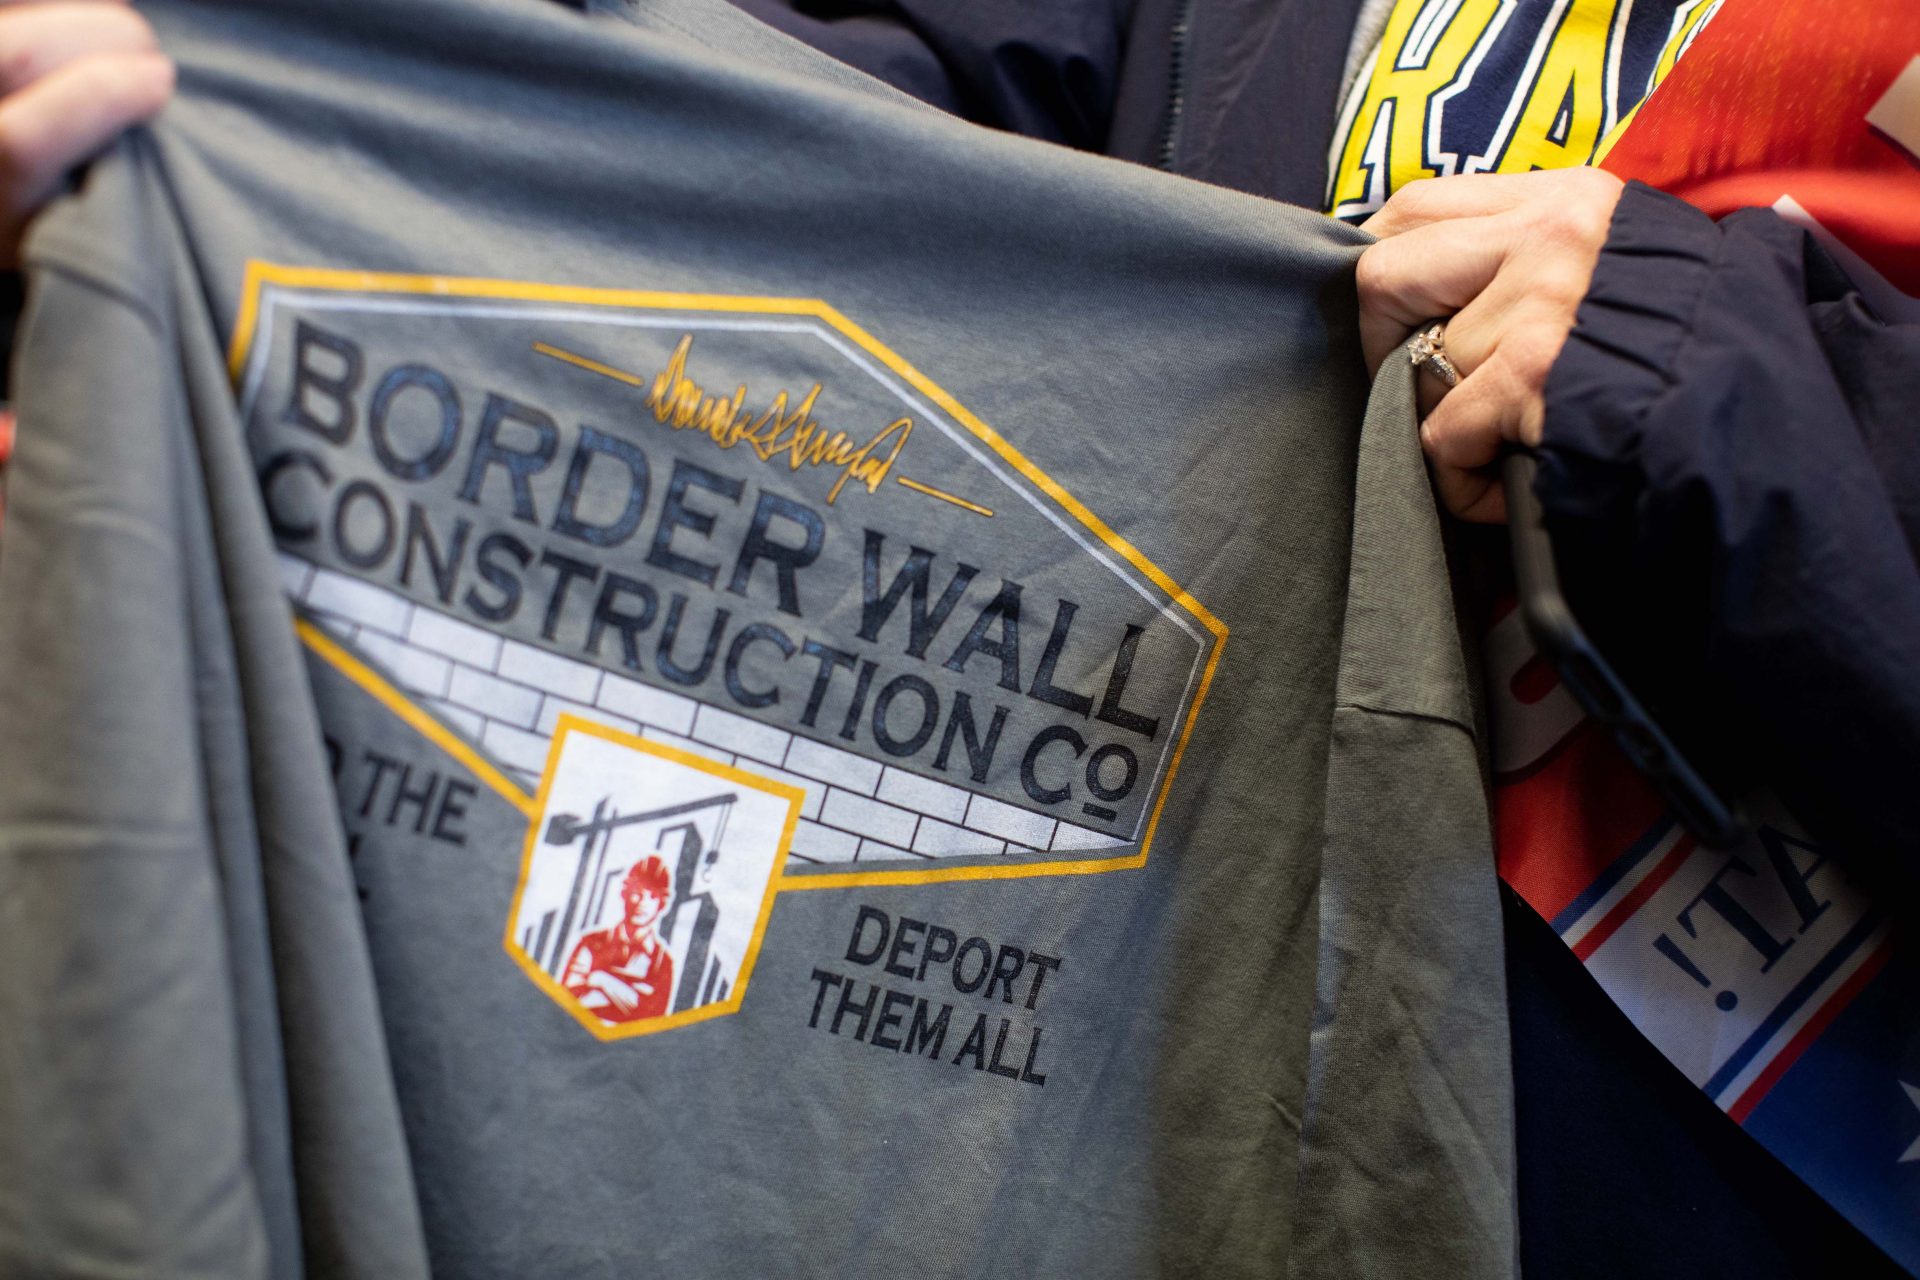 Many shoppers expressed support for the construction of the wall at the U.S.-Mexico border, as this t-shirt for a "Border Wall Construction Co." shows.